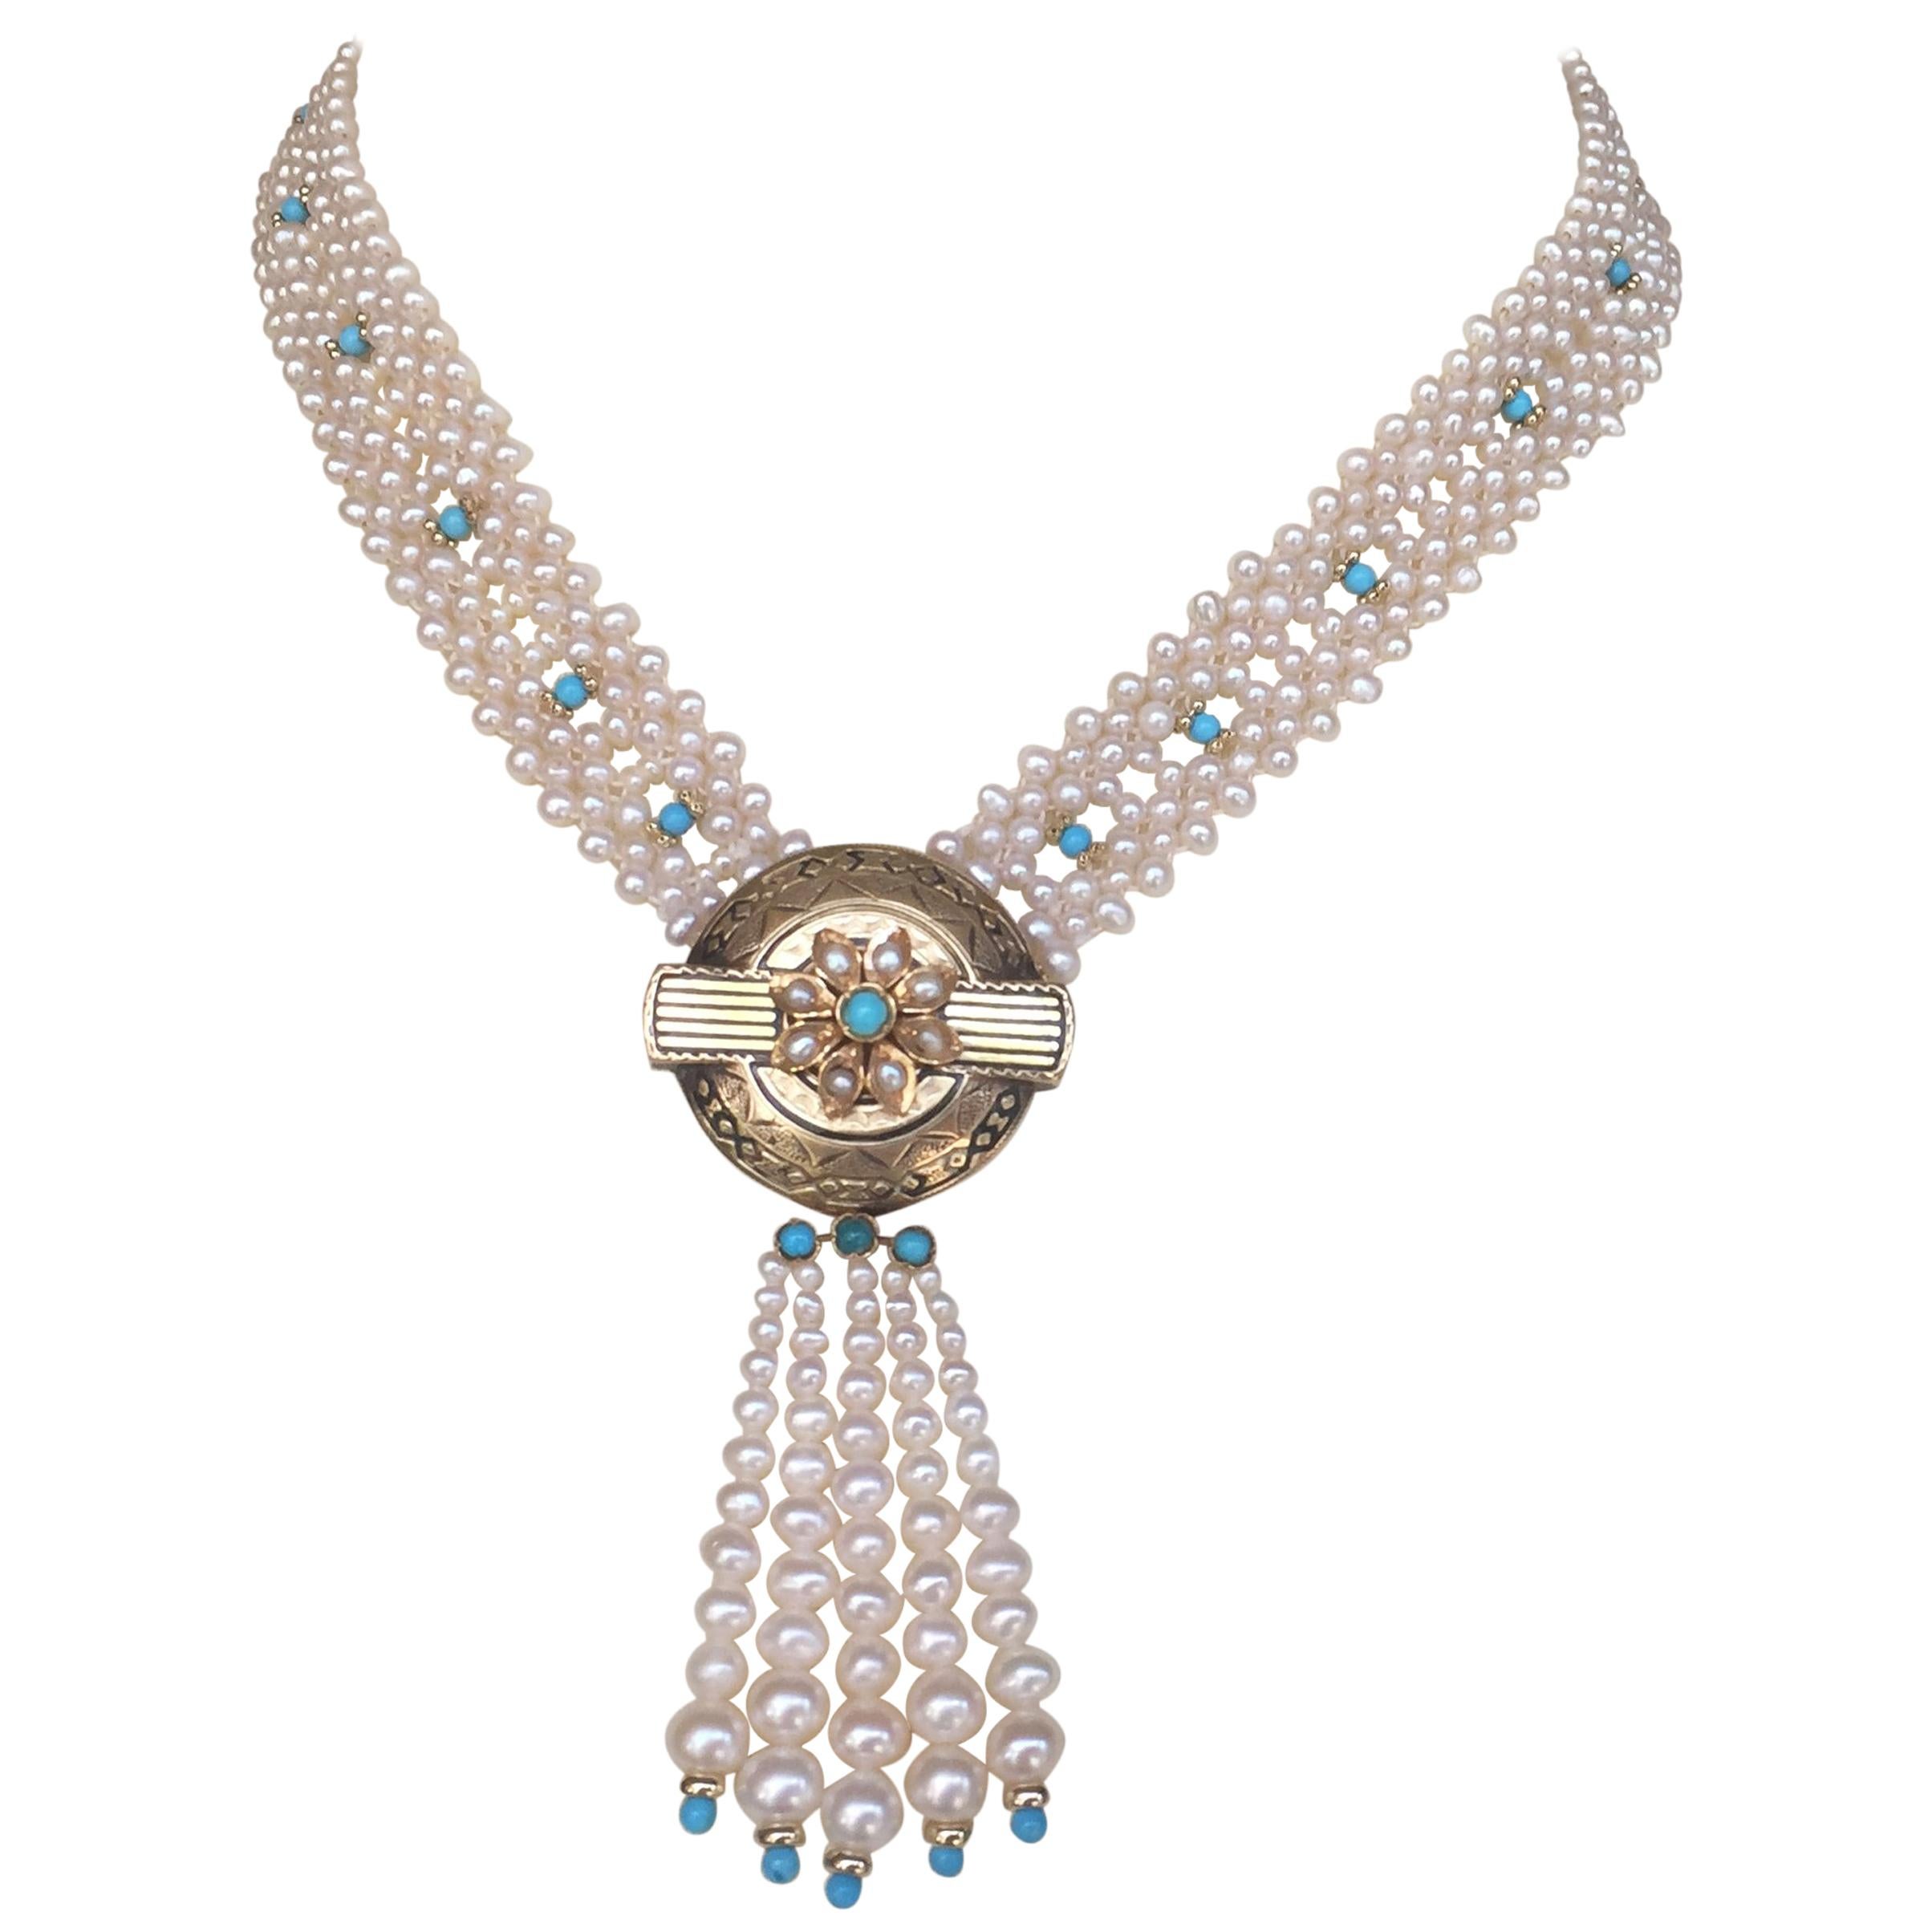 Marina J. Woven Pearl and Turquoise Necklace with 14K Yellow Gold Centerpiece 